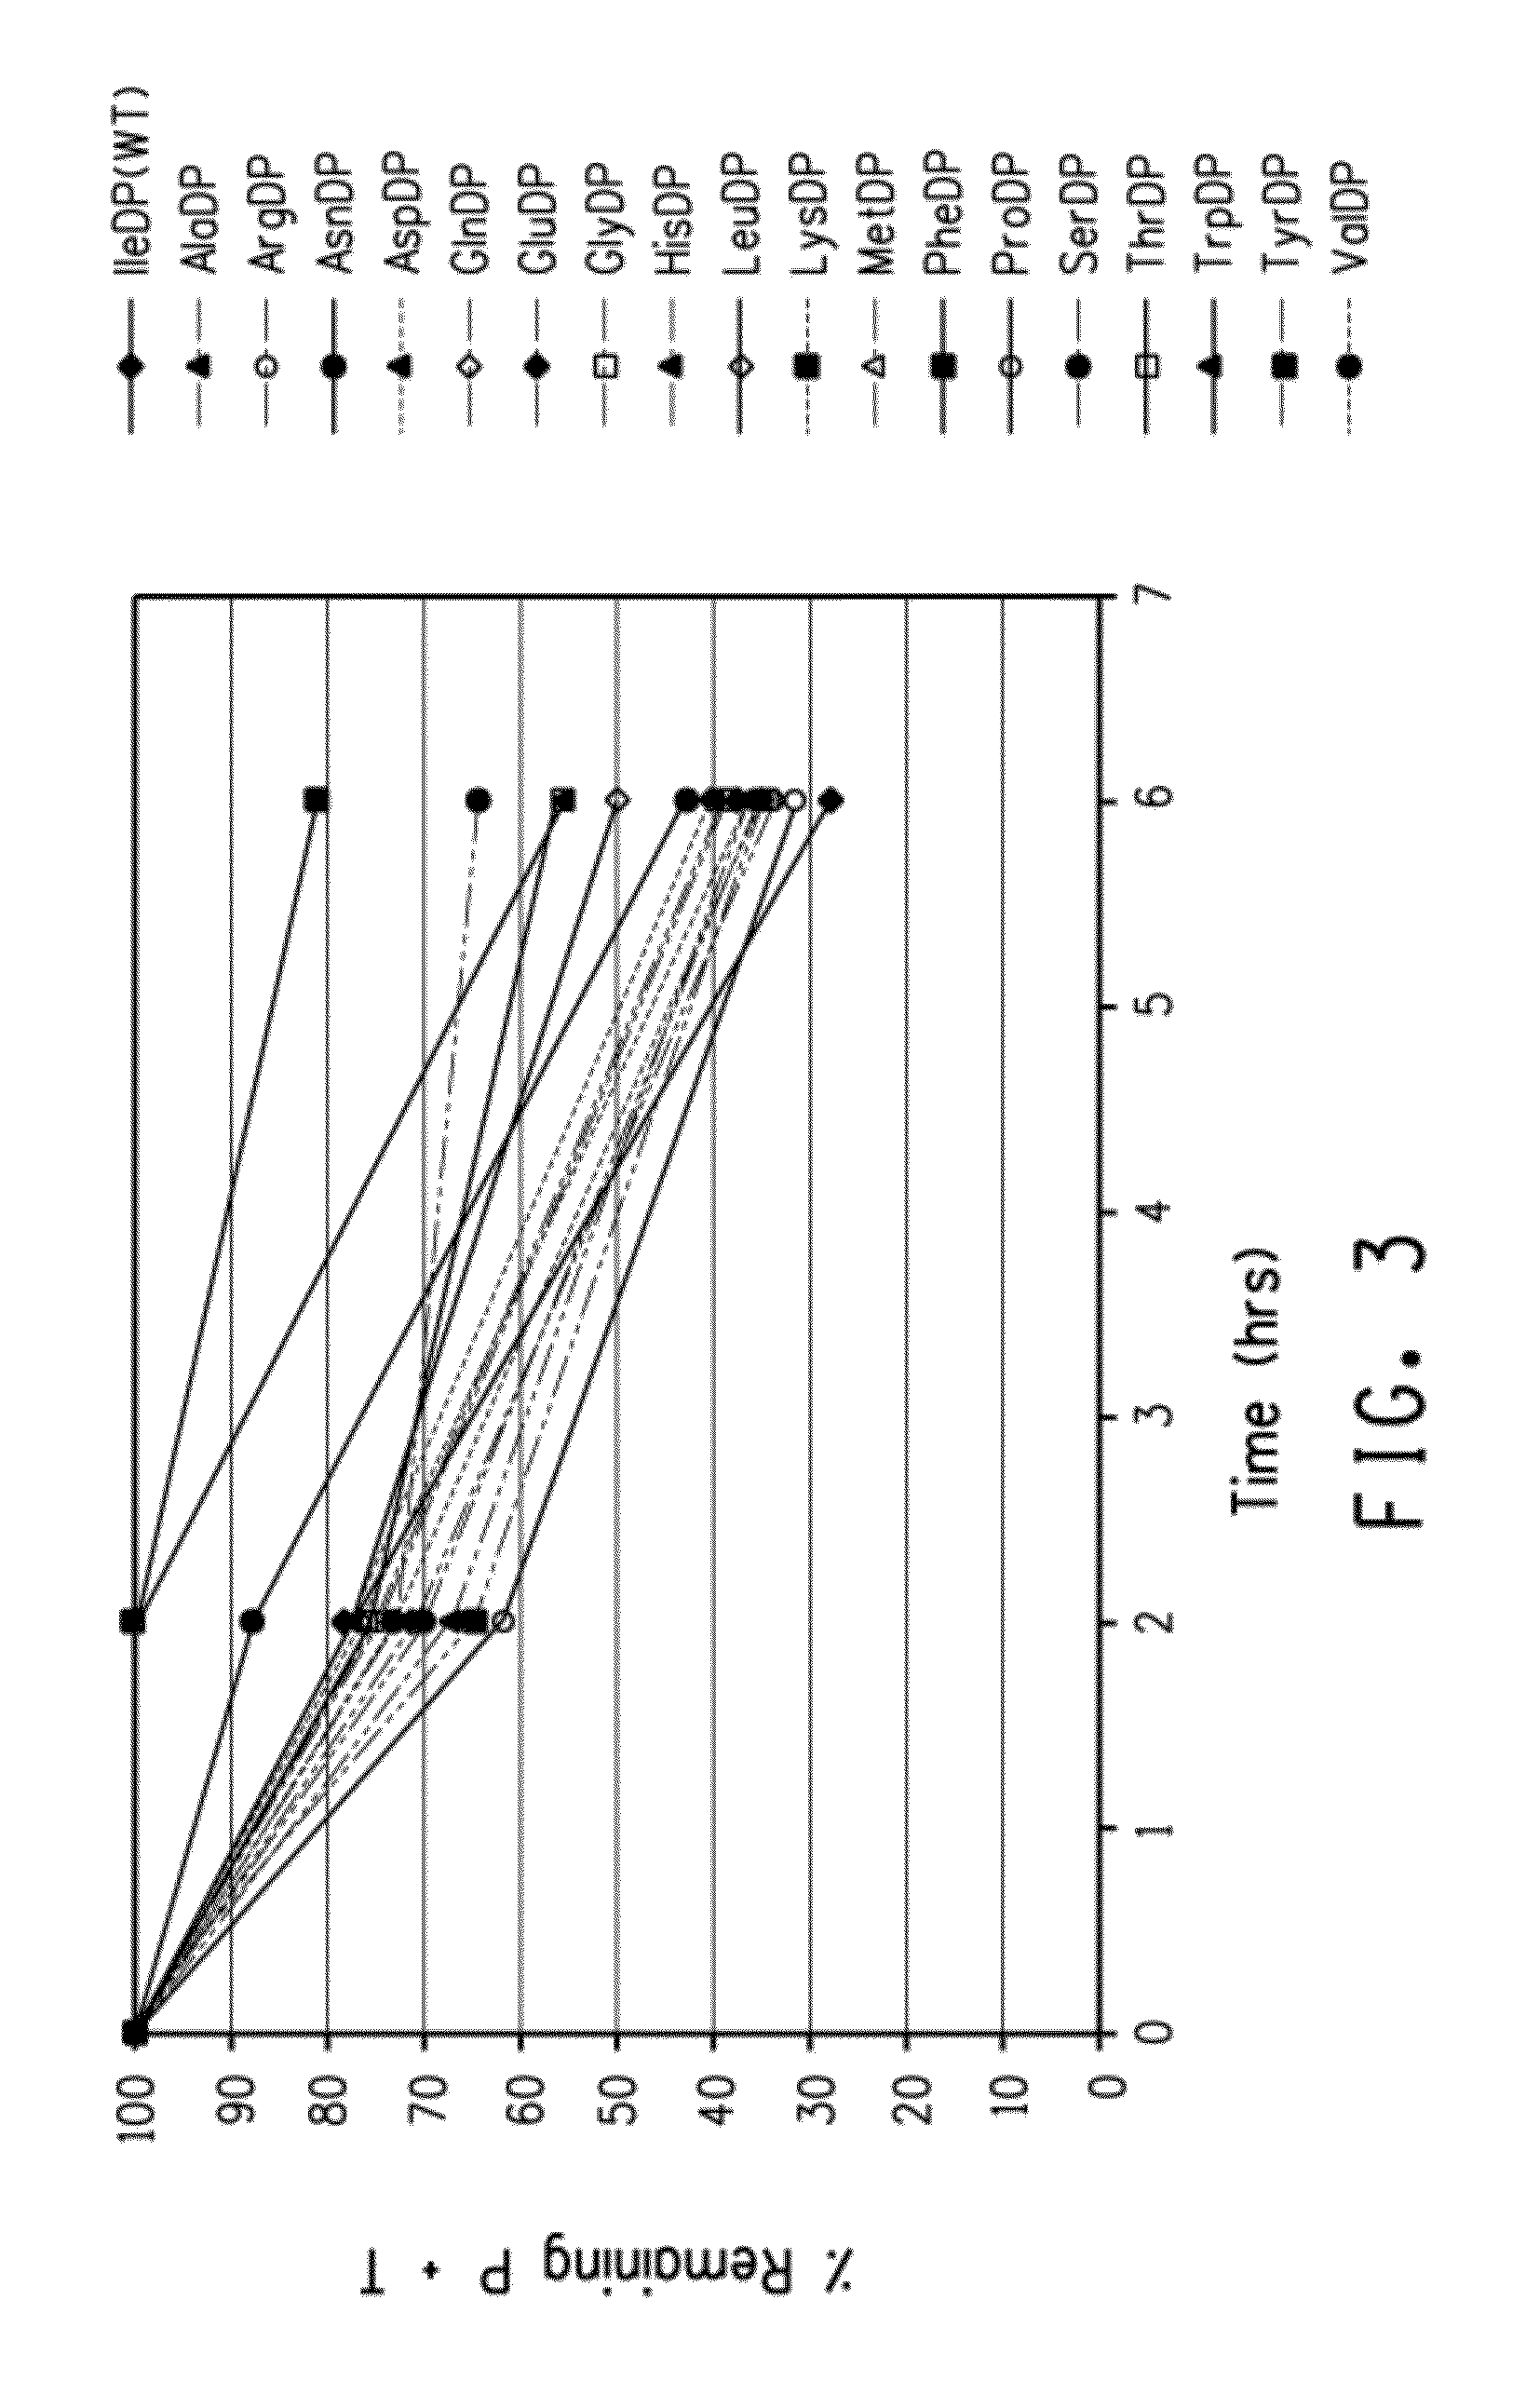 Acid-clevable linkers exhibiting altered rates of acid hydrolysis